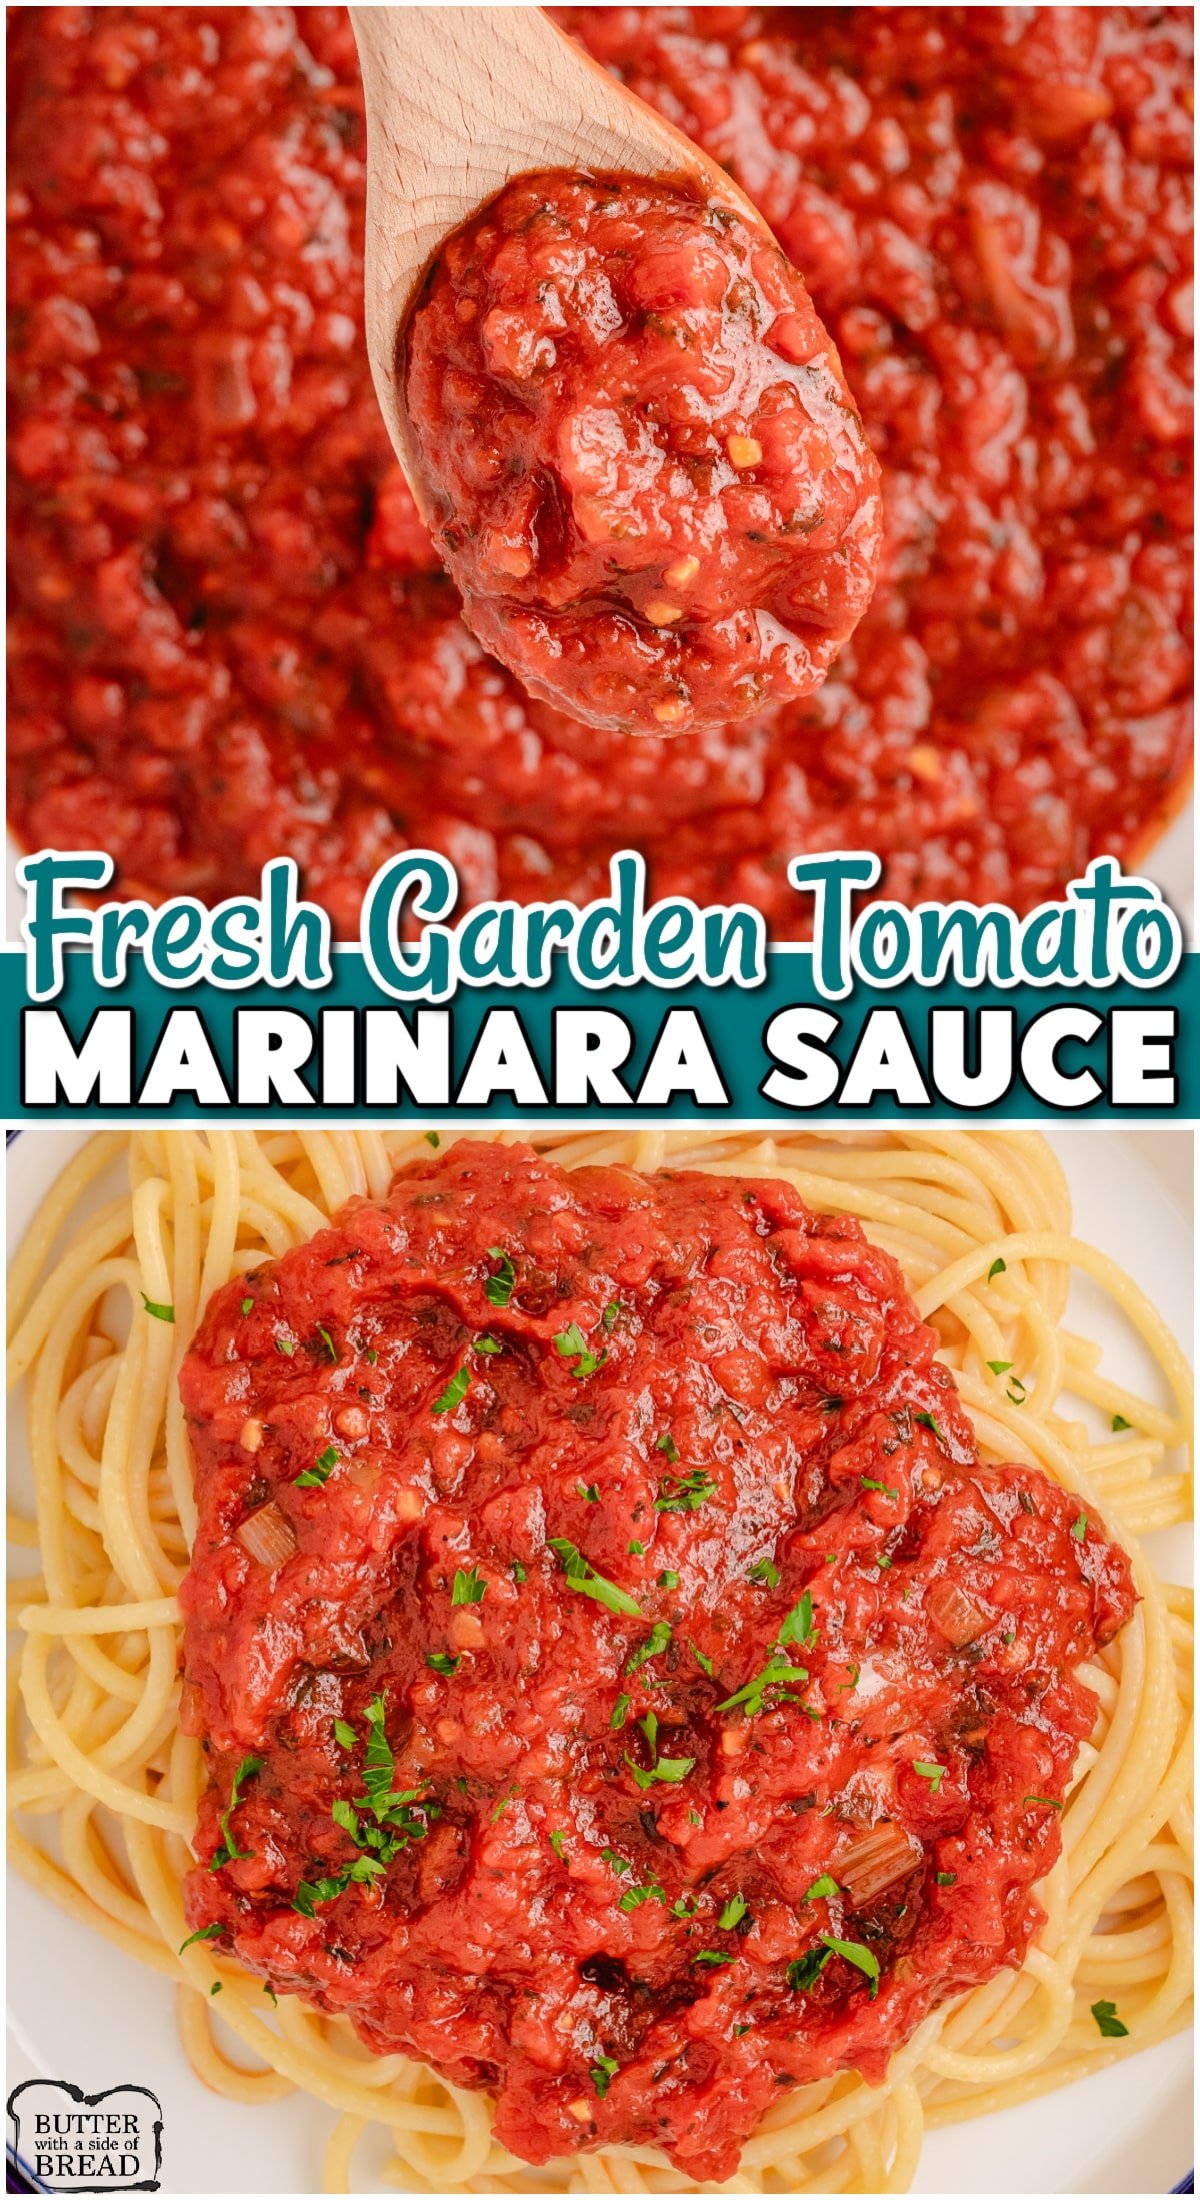 Fresh Tomato Marinara Sauce made with garden fresh tomatoes & flavorful herbs & spices! Every bite is bursting with amazing flavor!